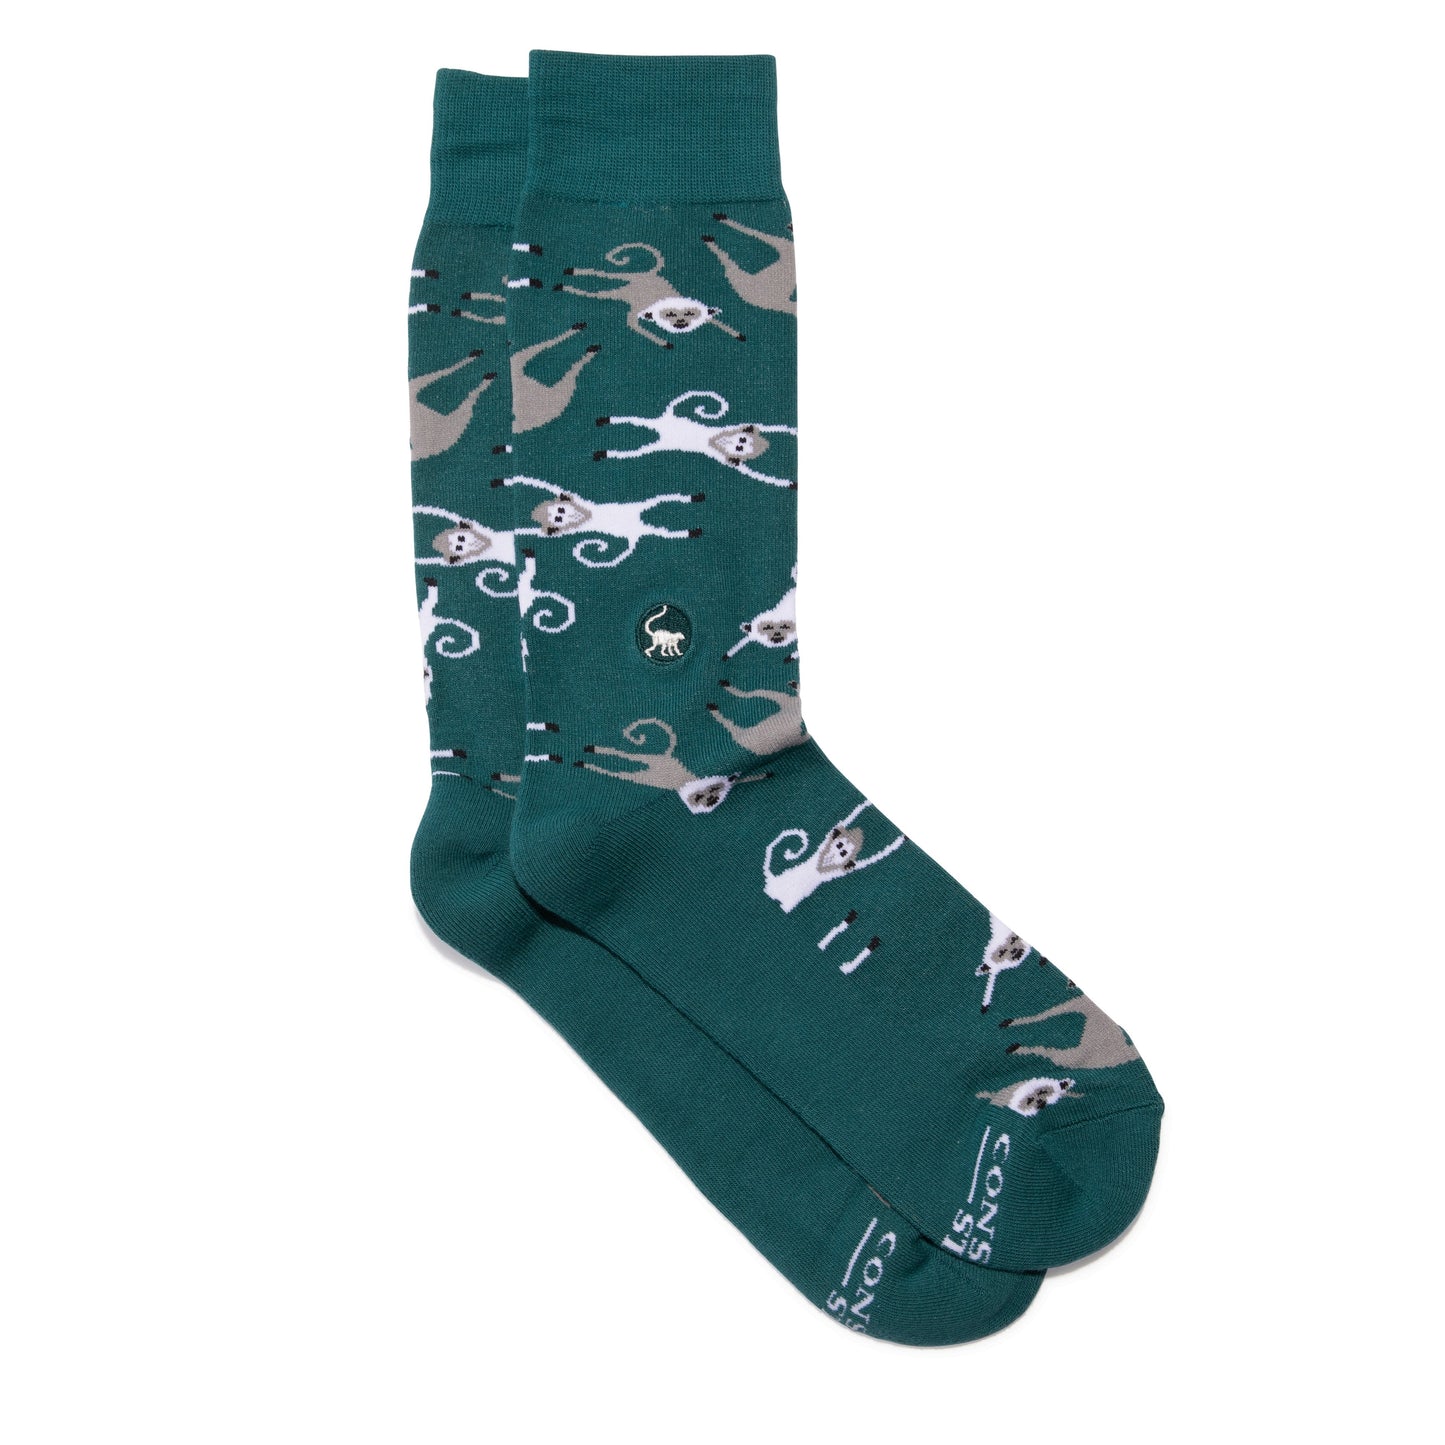 Conscious Step: Socks that Protect Monkeys